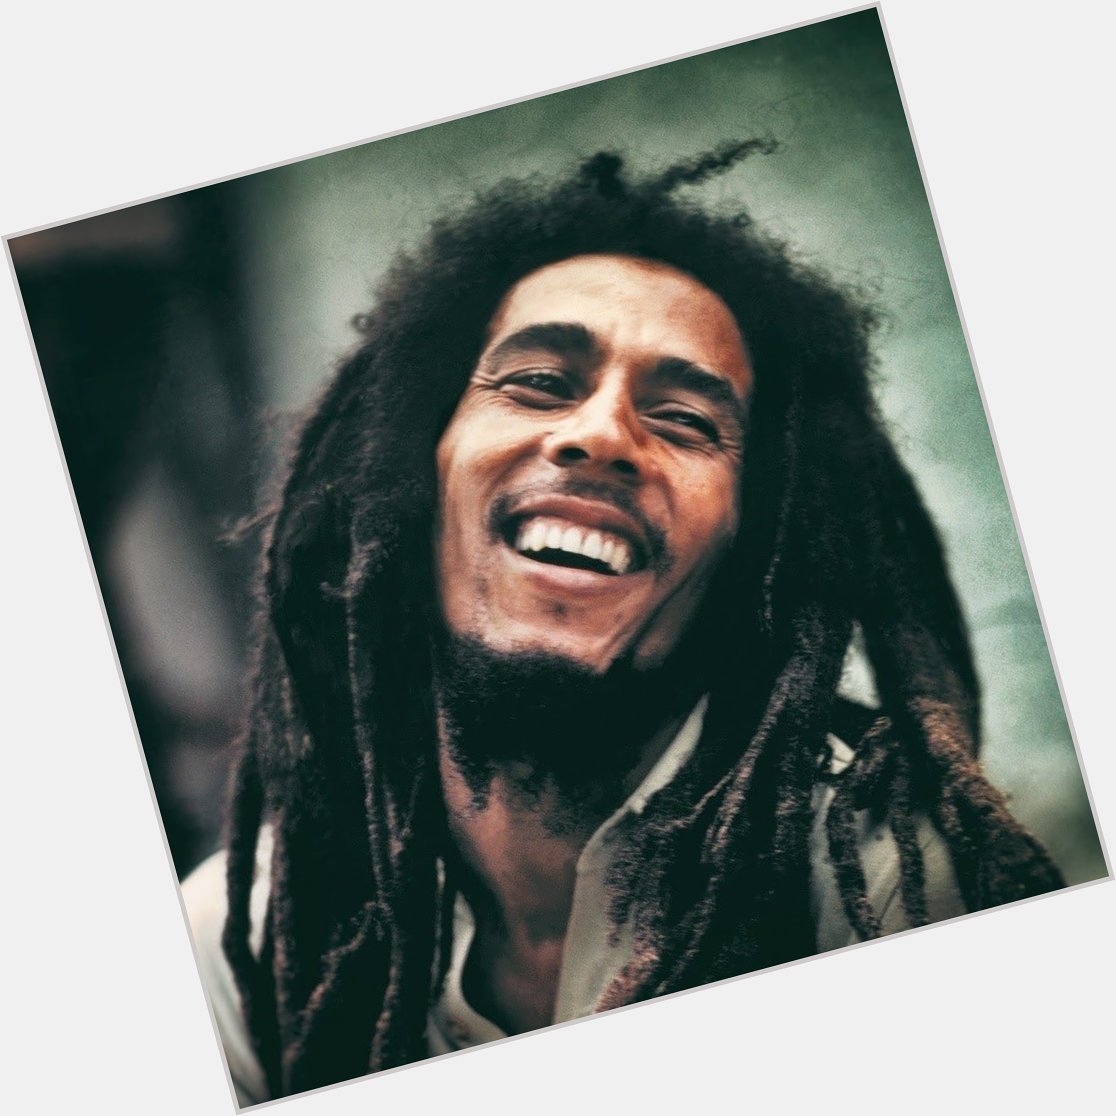 Happy Heavenly birthday to the iconic Bob Marley. He would have turned 77 today. 